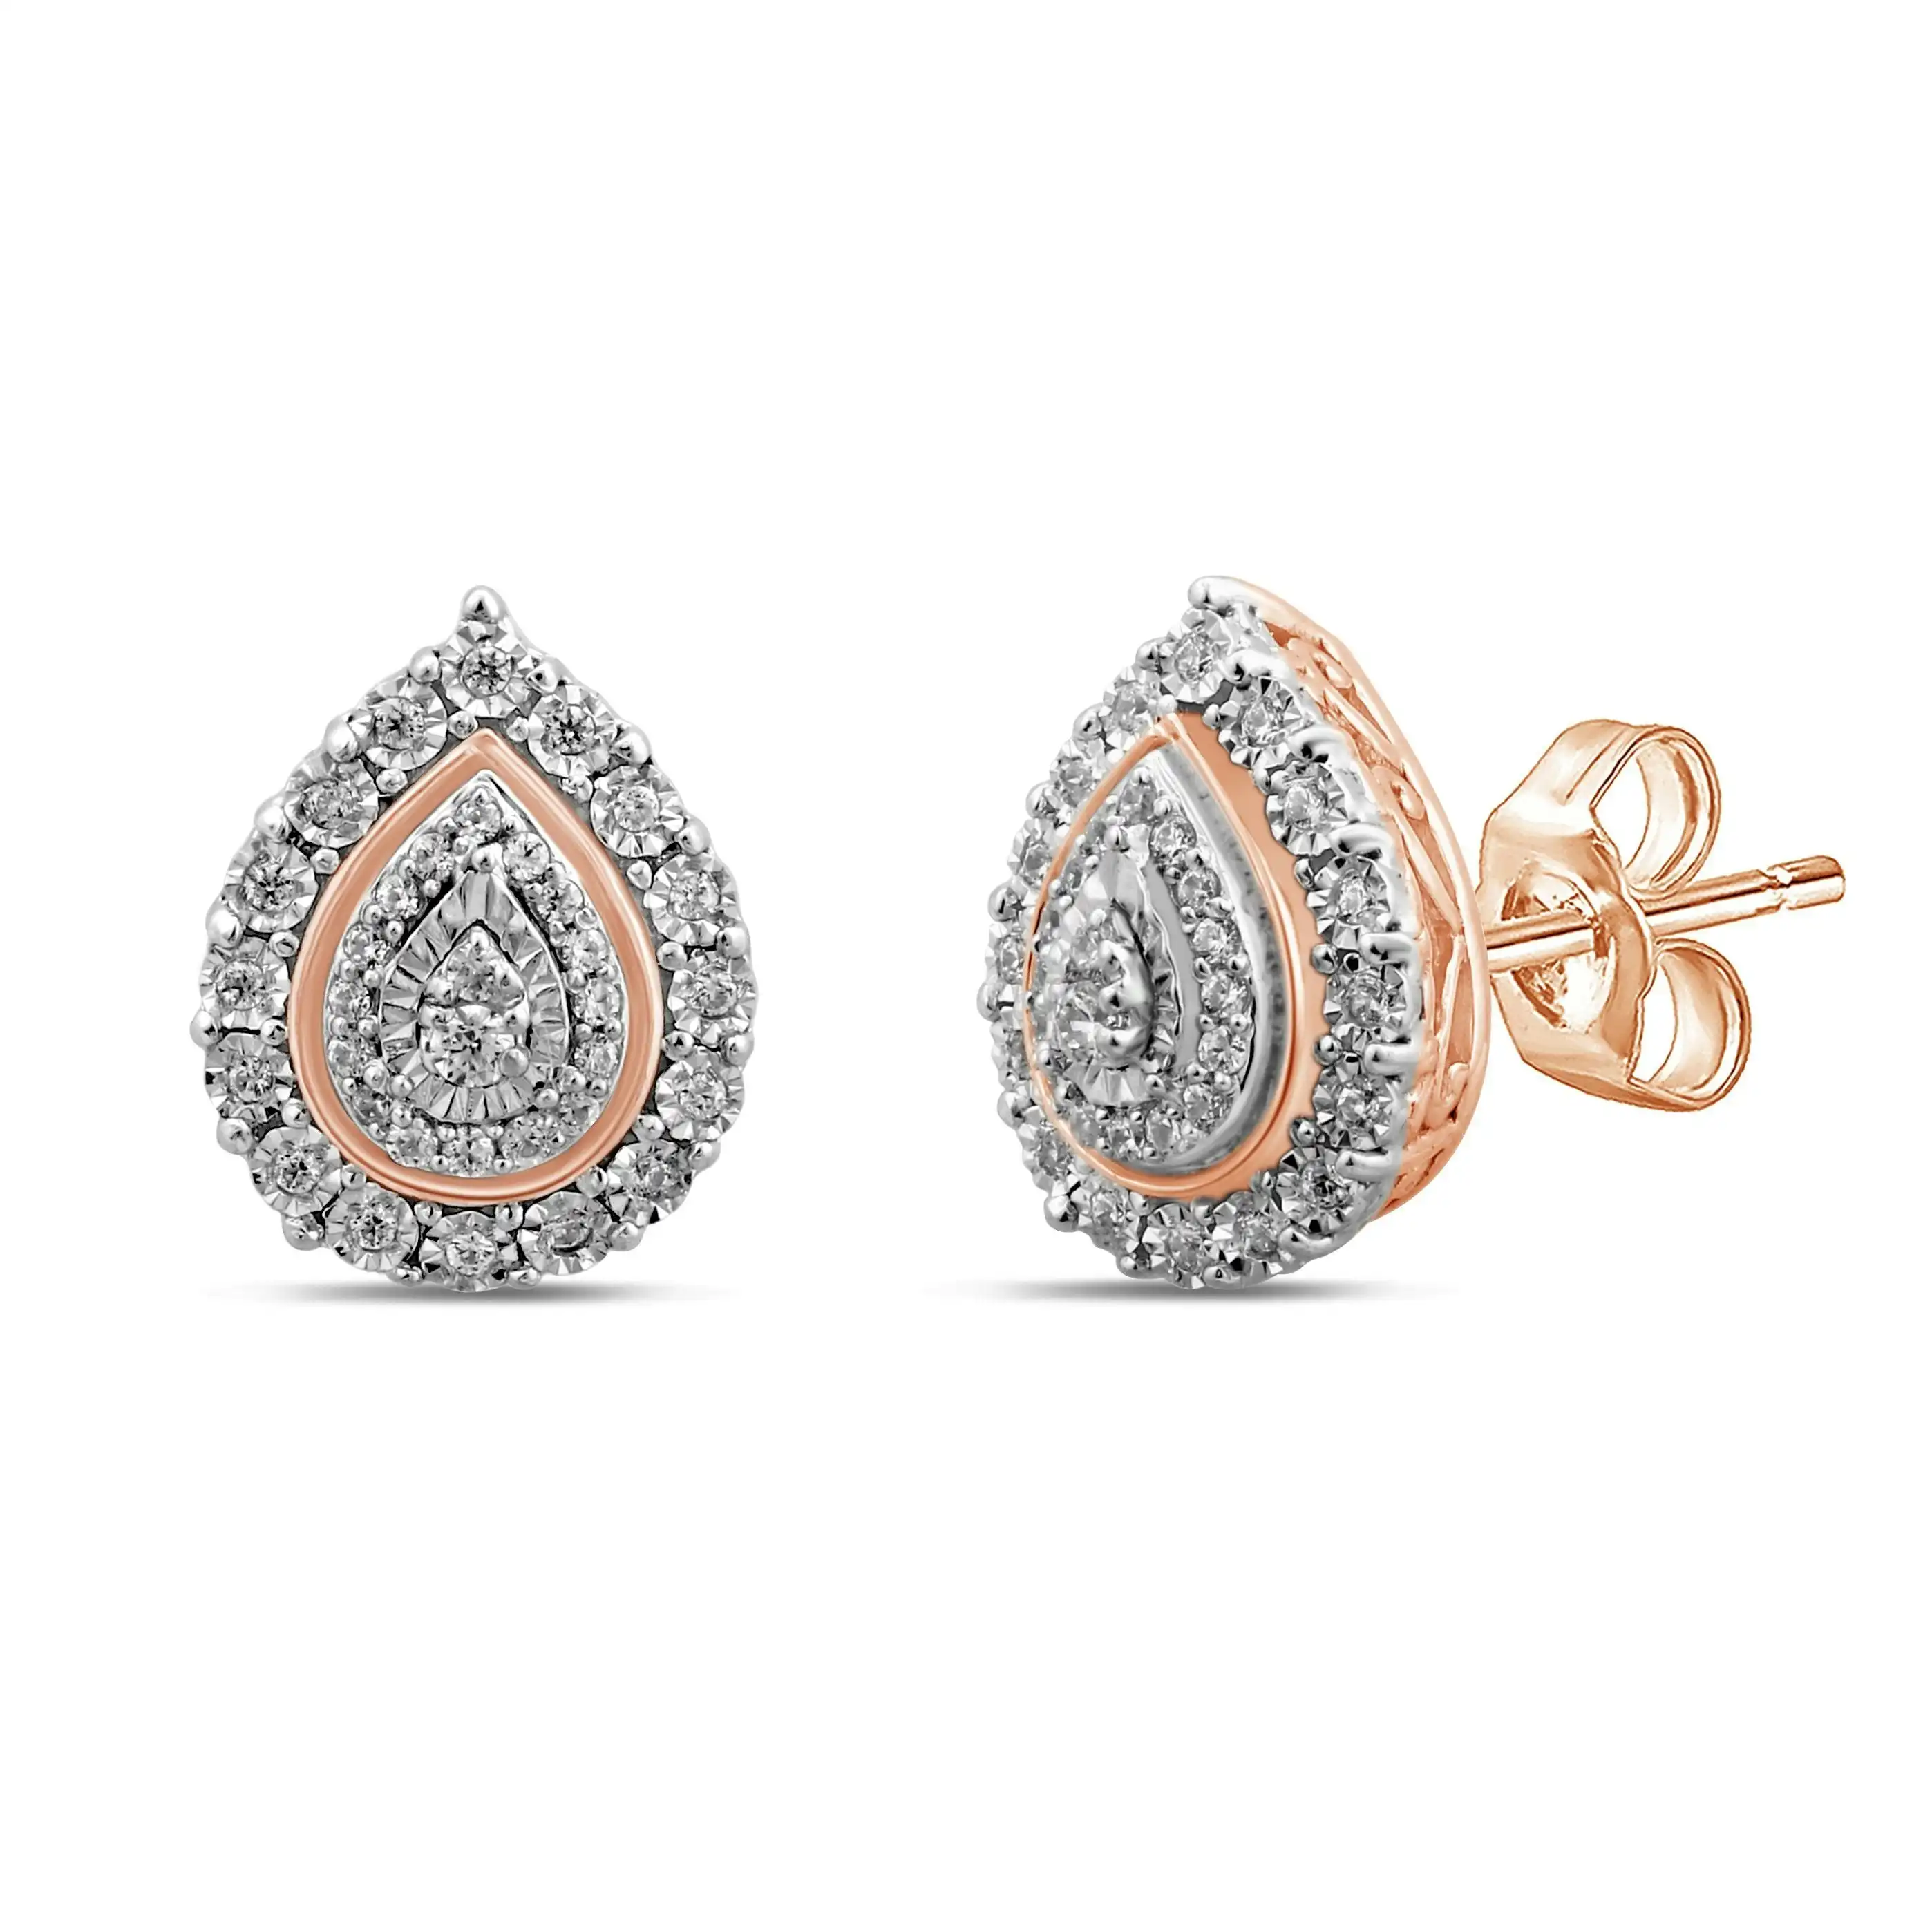 Double Pear Halo Stud Earrings with 1/5ct of Diamonds in 9ct Rose Gold